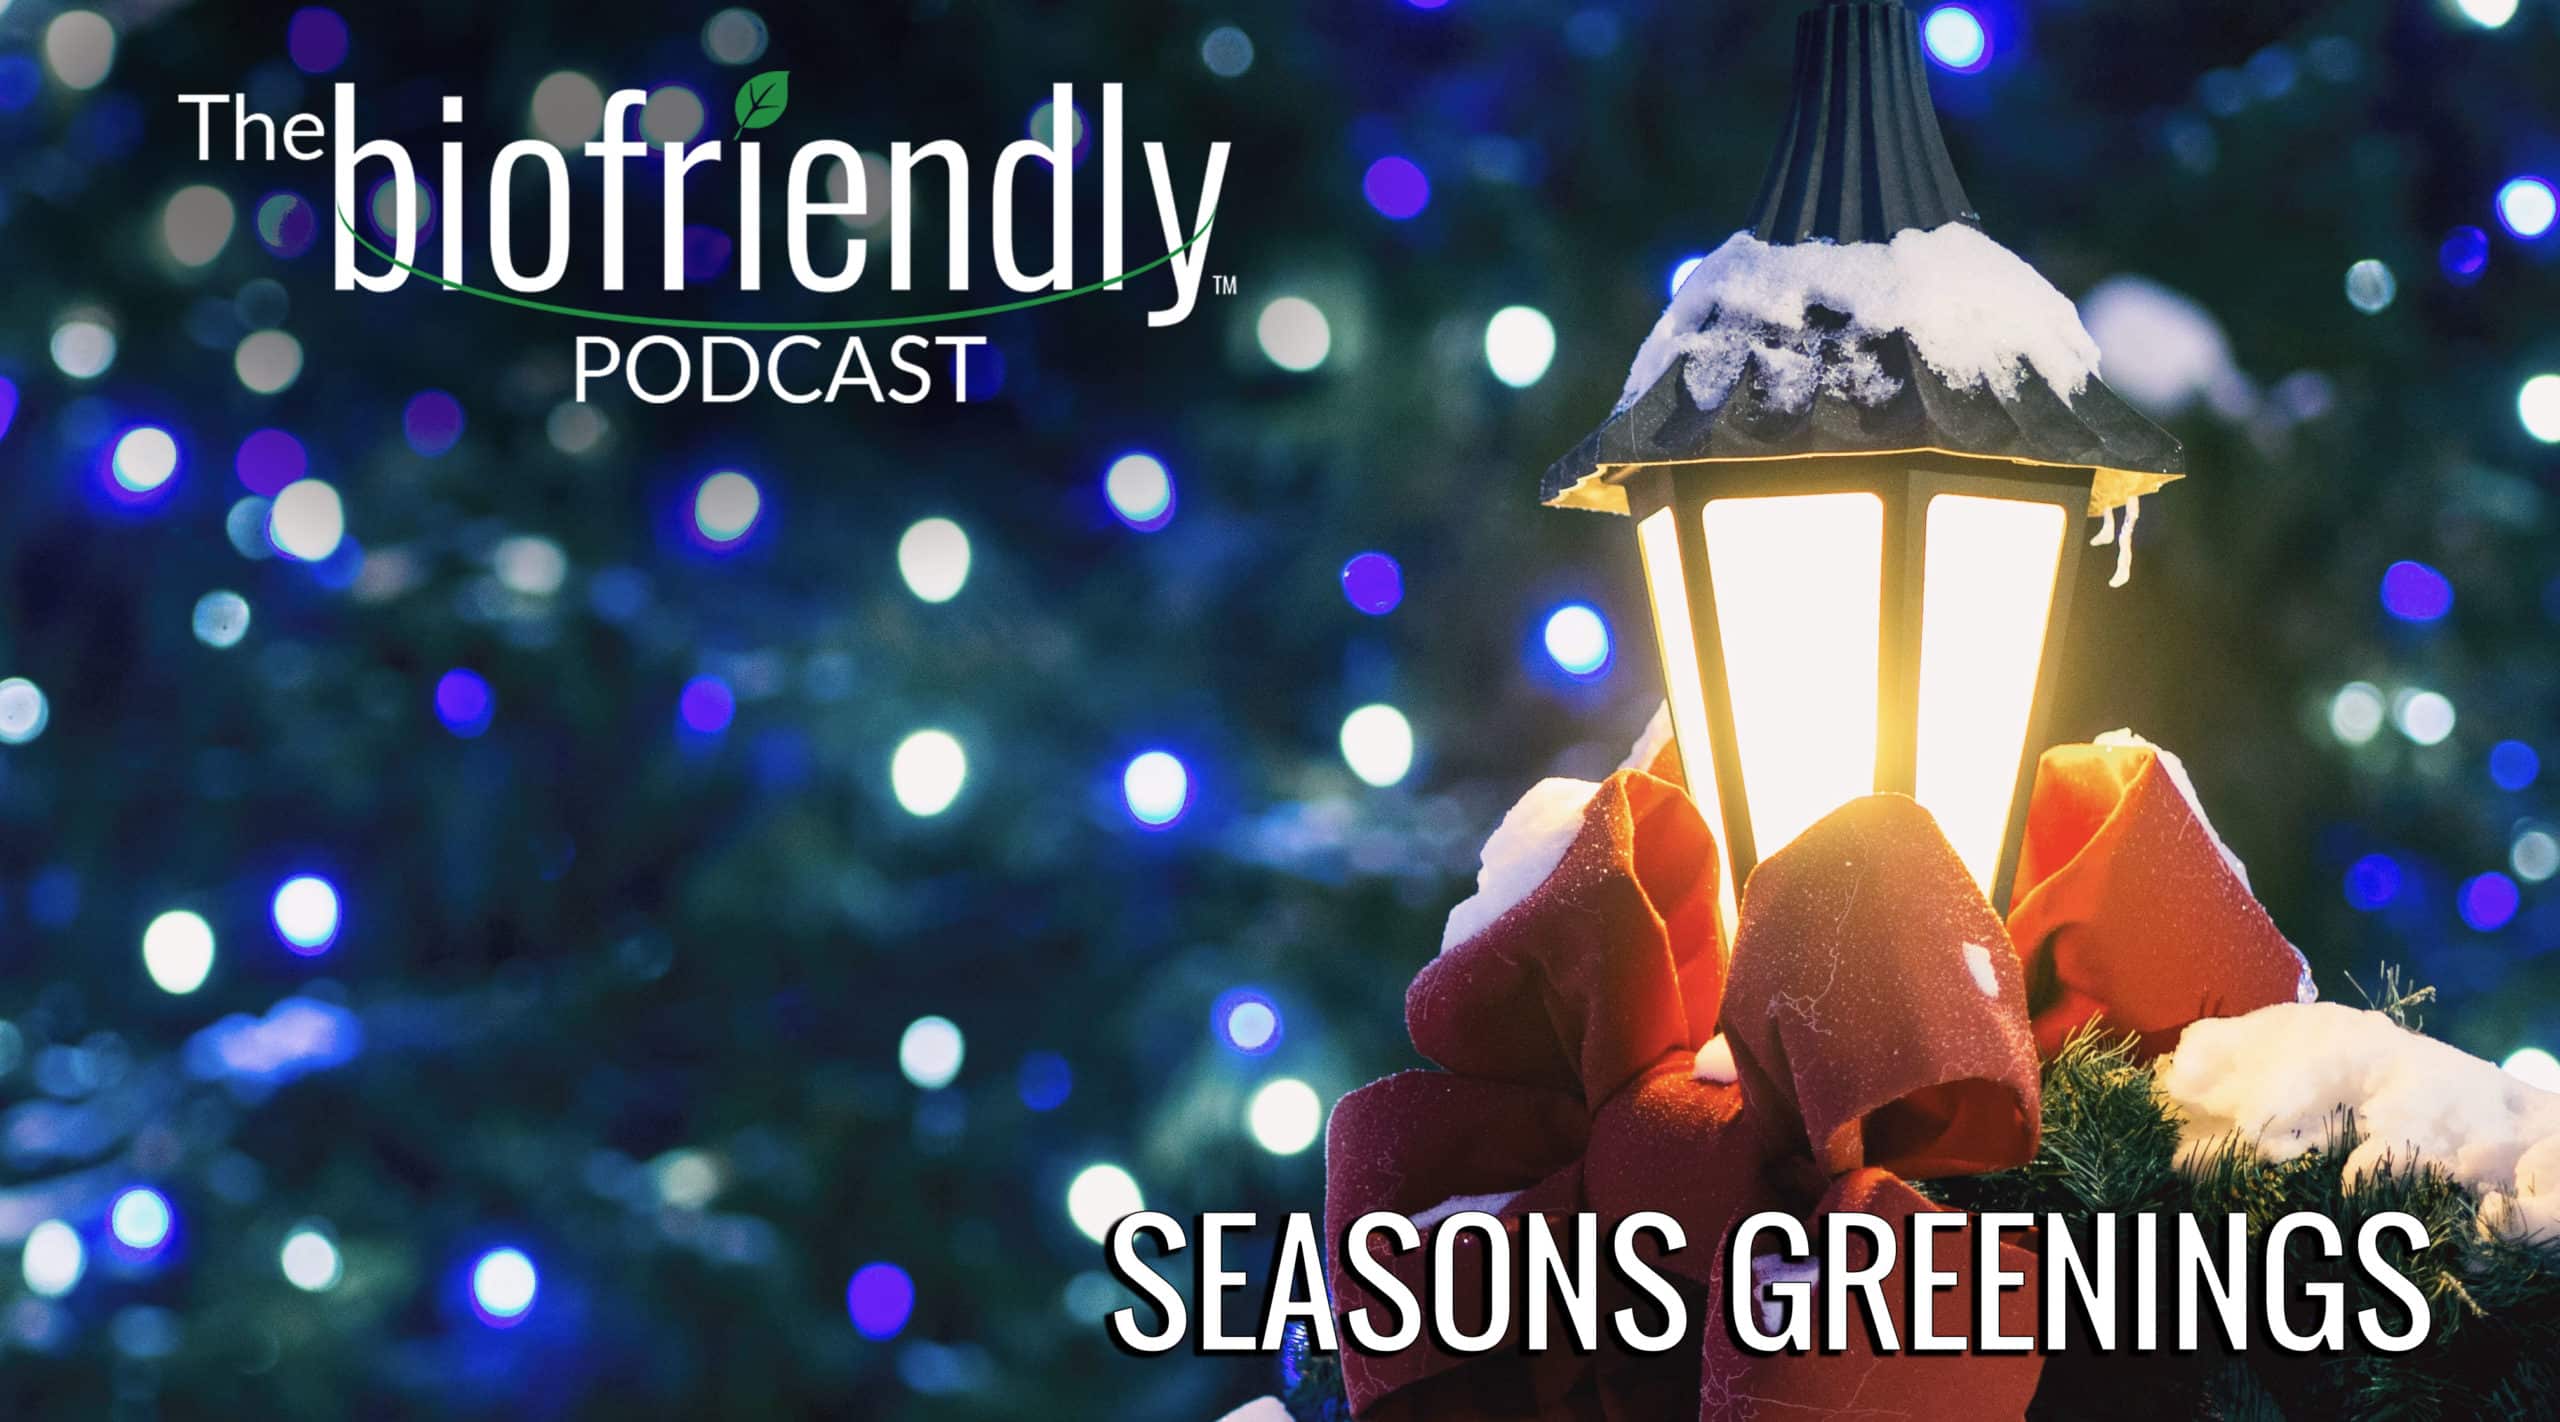 The Biofriendly Podcast - Episode 42 - Seasons Greetings